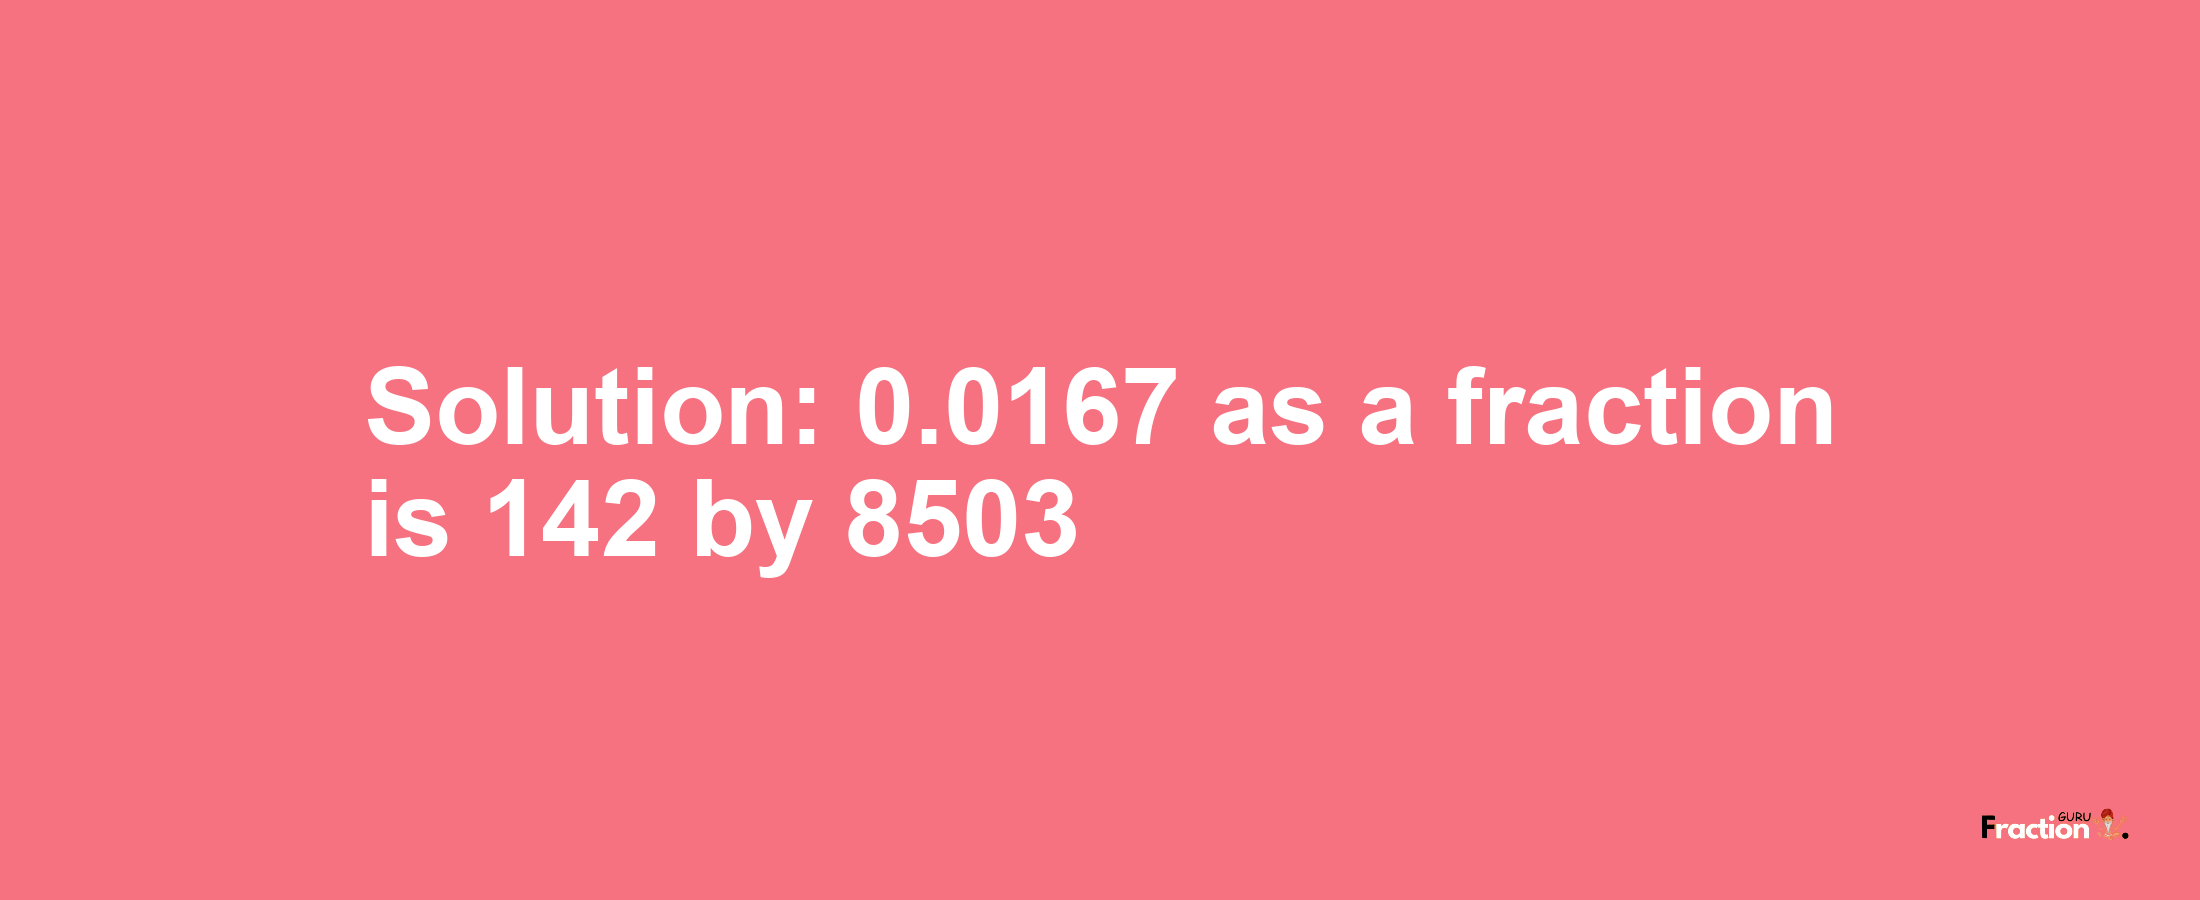 Solution:0.0167 as a fraction is 142/8503